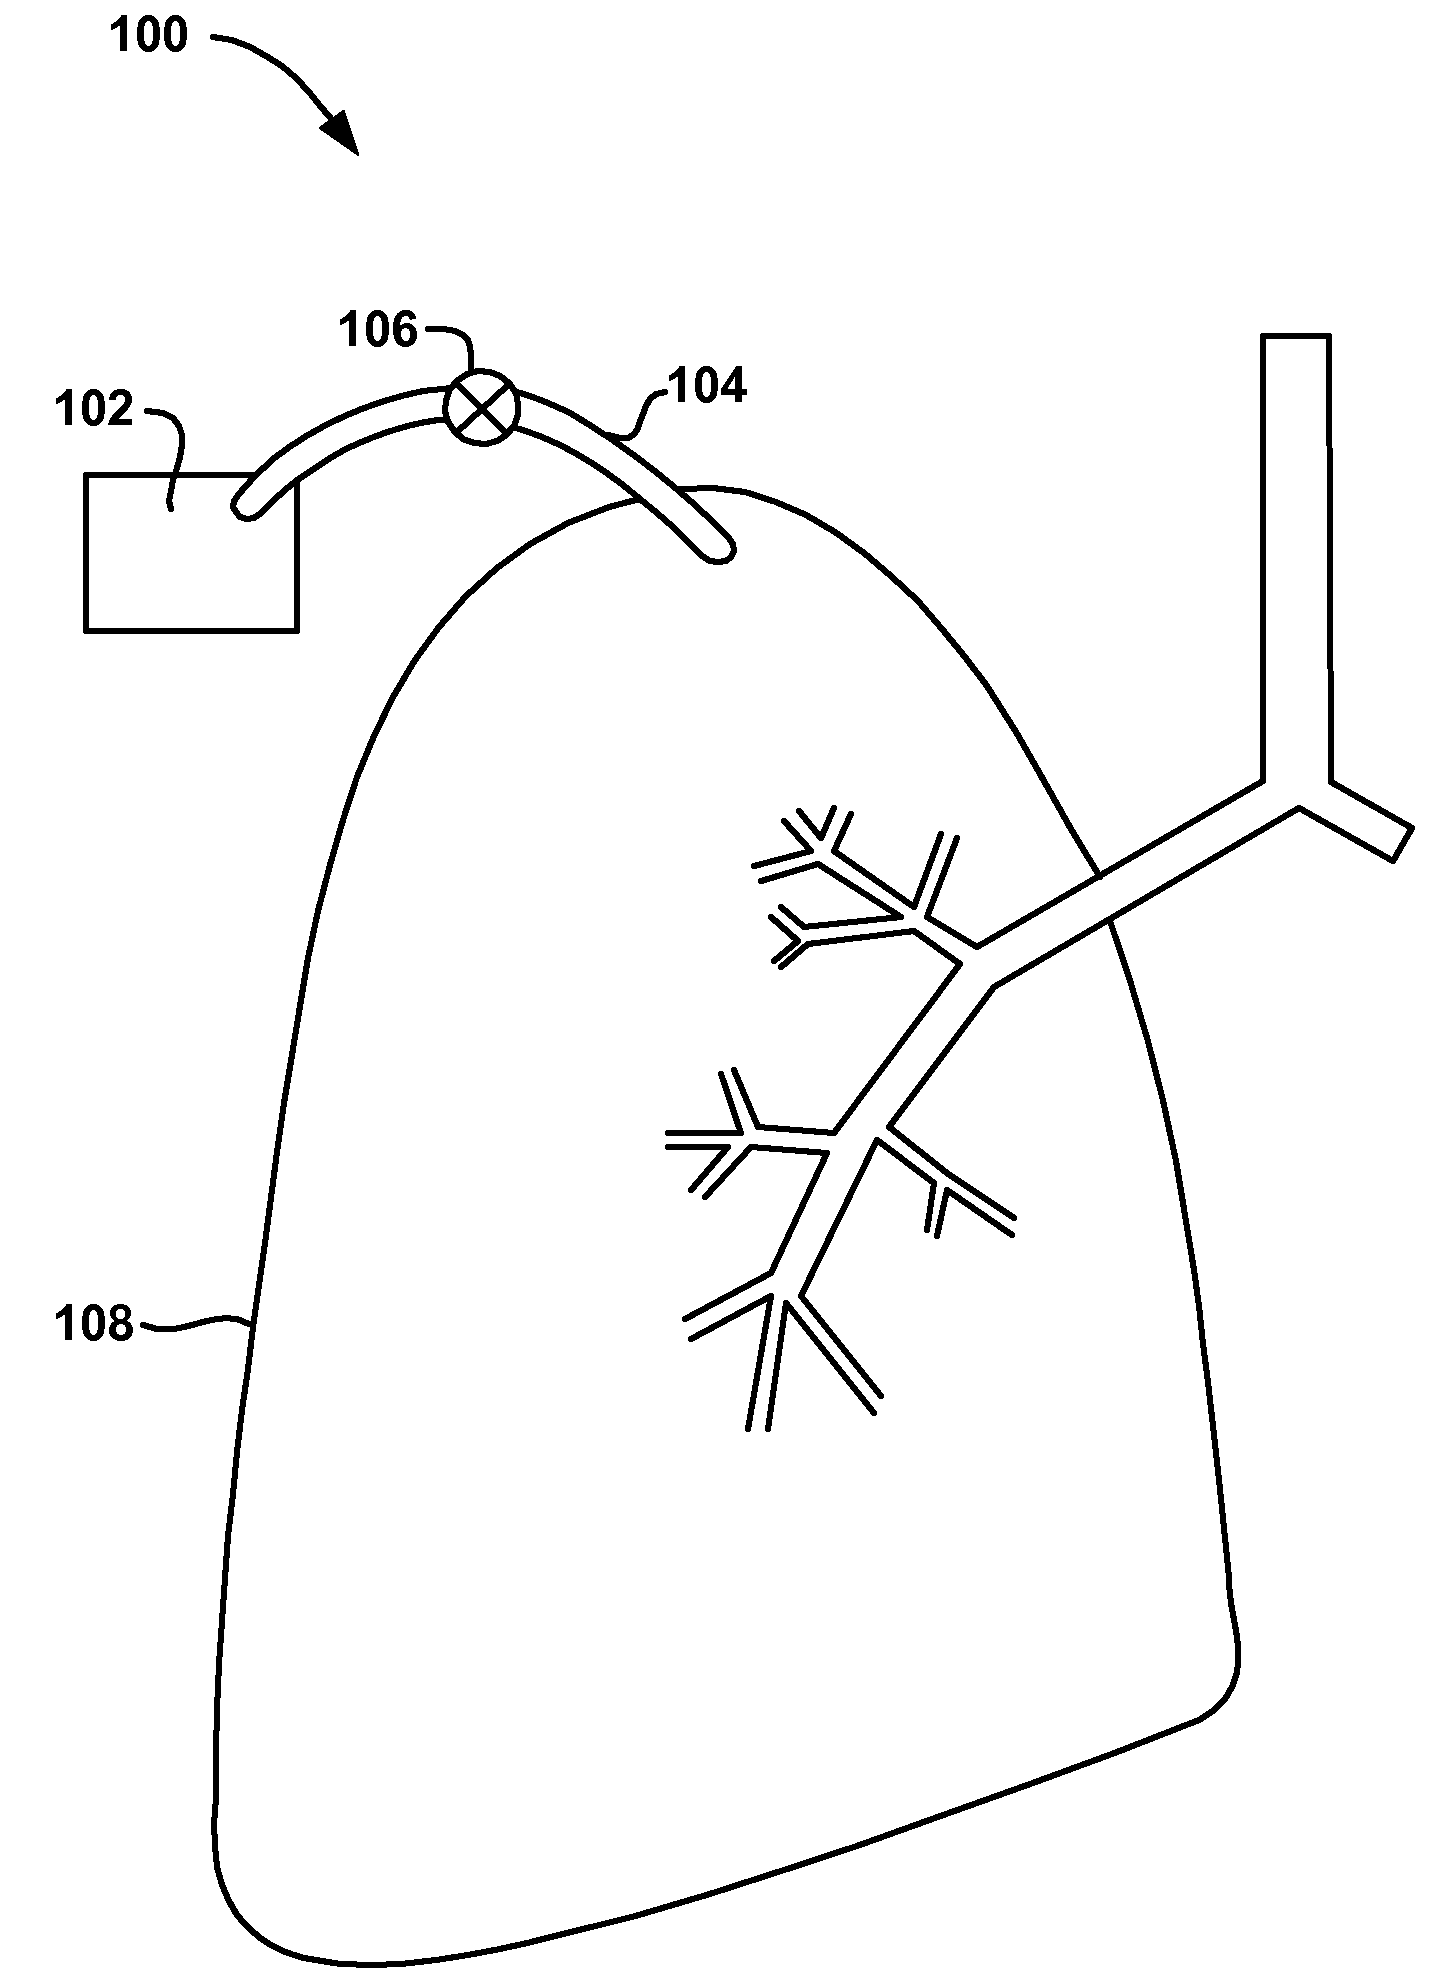 Methods and devices to maintain patency of a lumen in parenchymal tissue of the lung